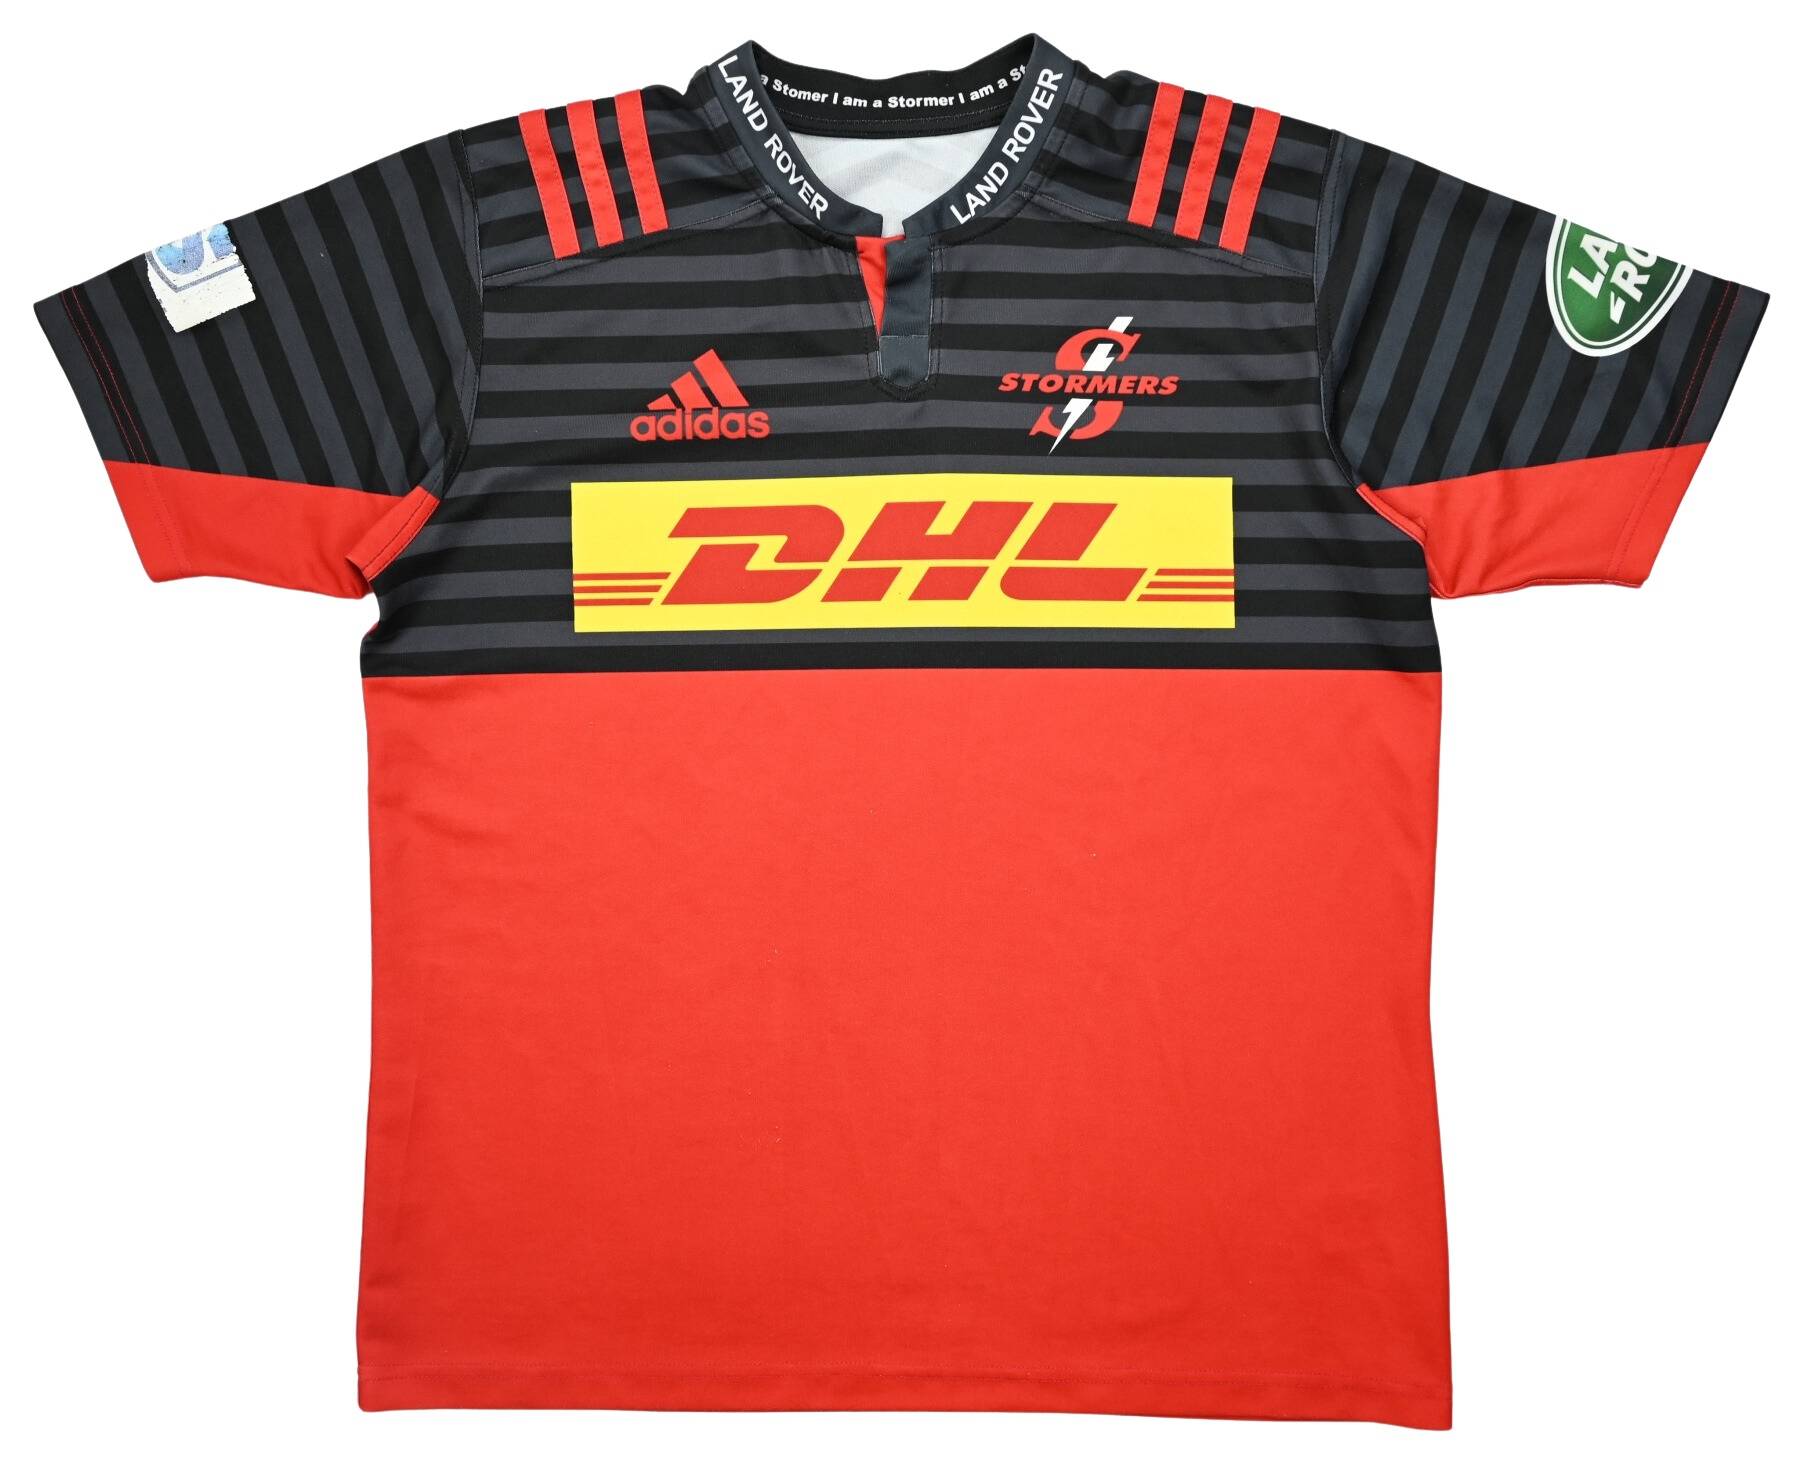 STORMERS RUGBY SHIRT XL Rugby \ Rugby Union \ Stormers | Classic-Shirts.com